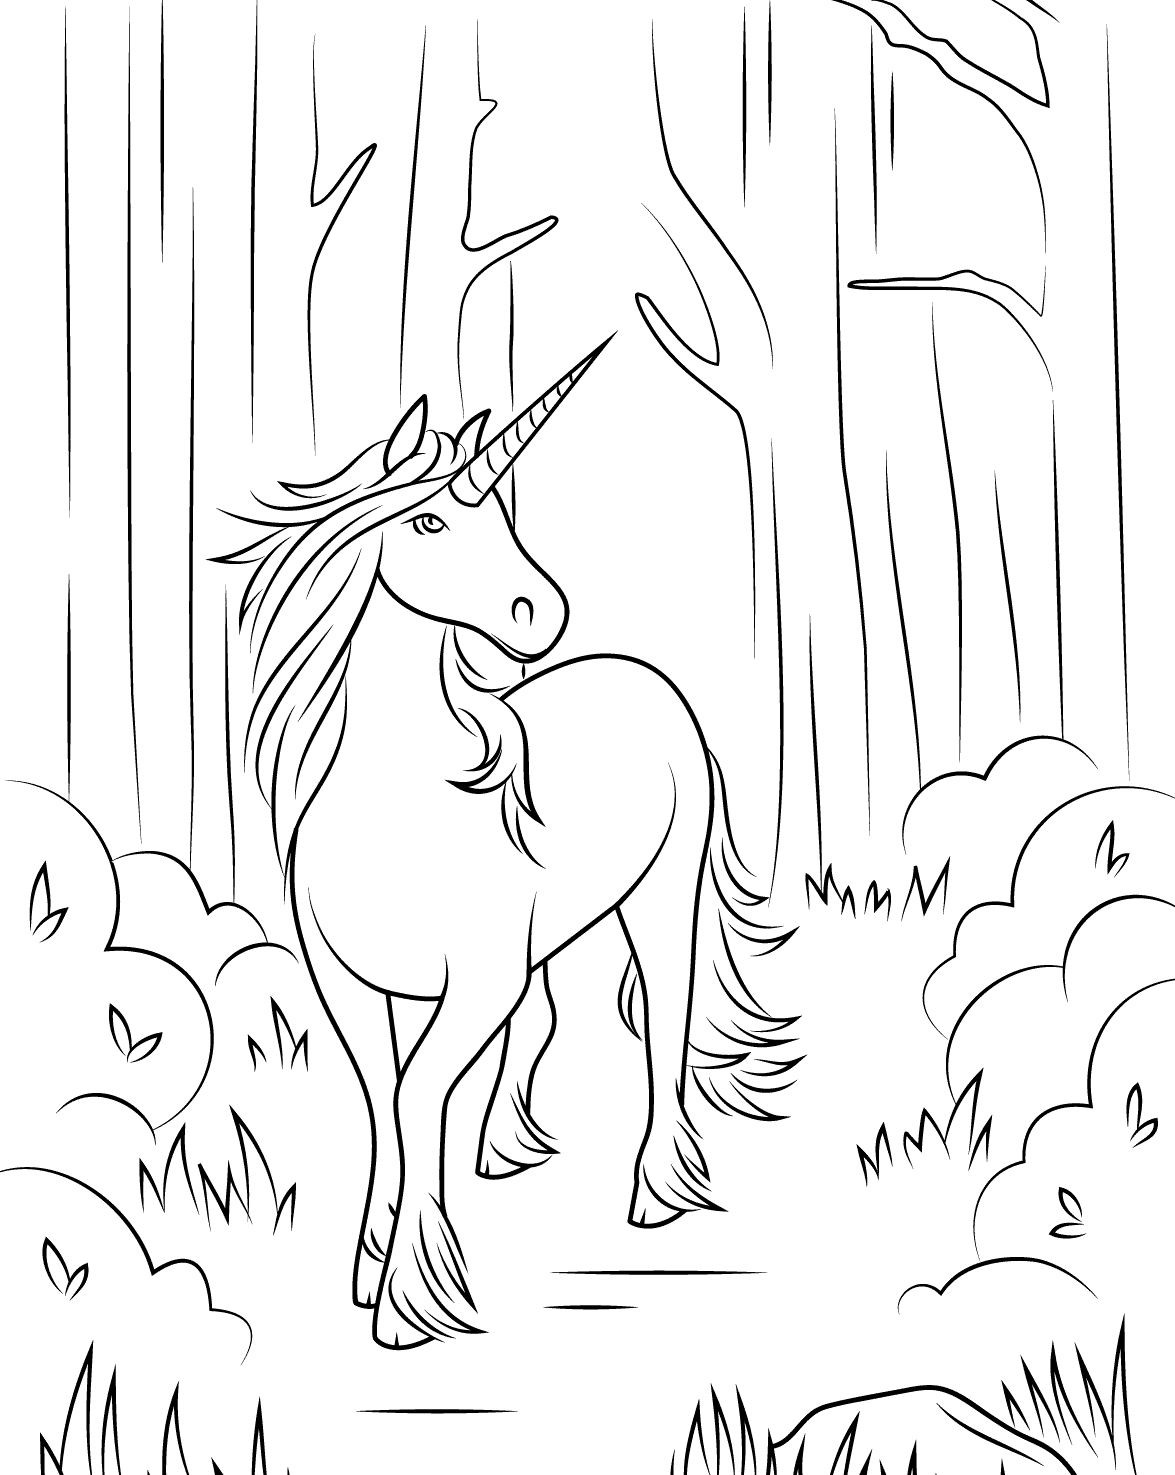 Unicorno Coloring Pages Unicorn Coloring Pages For Adults Best Coloring Pages For Kids